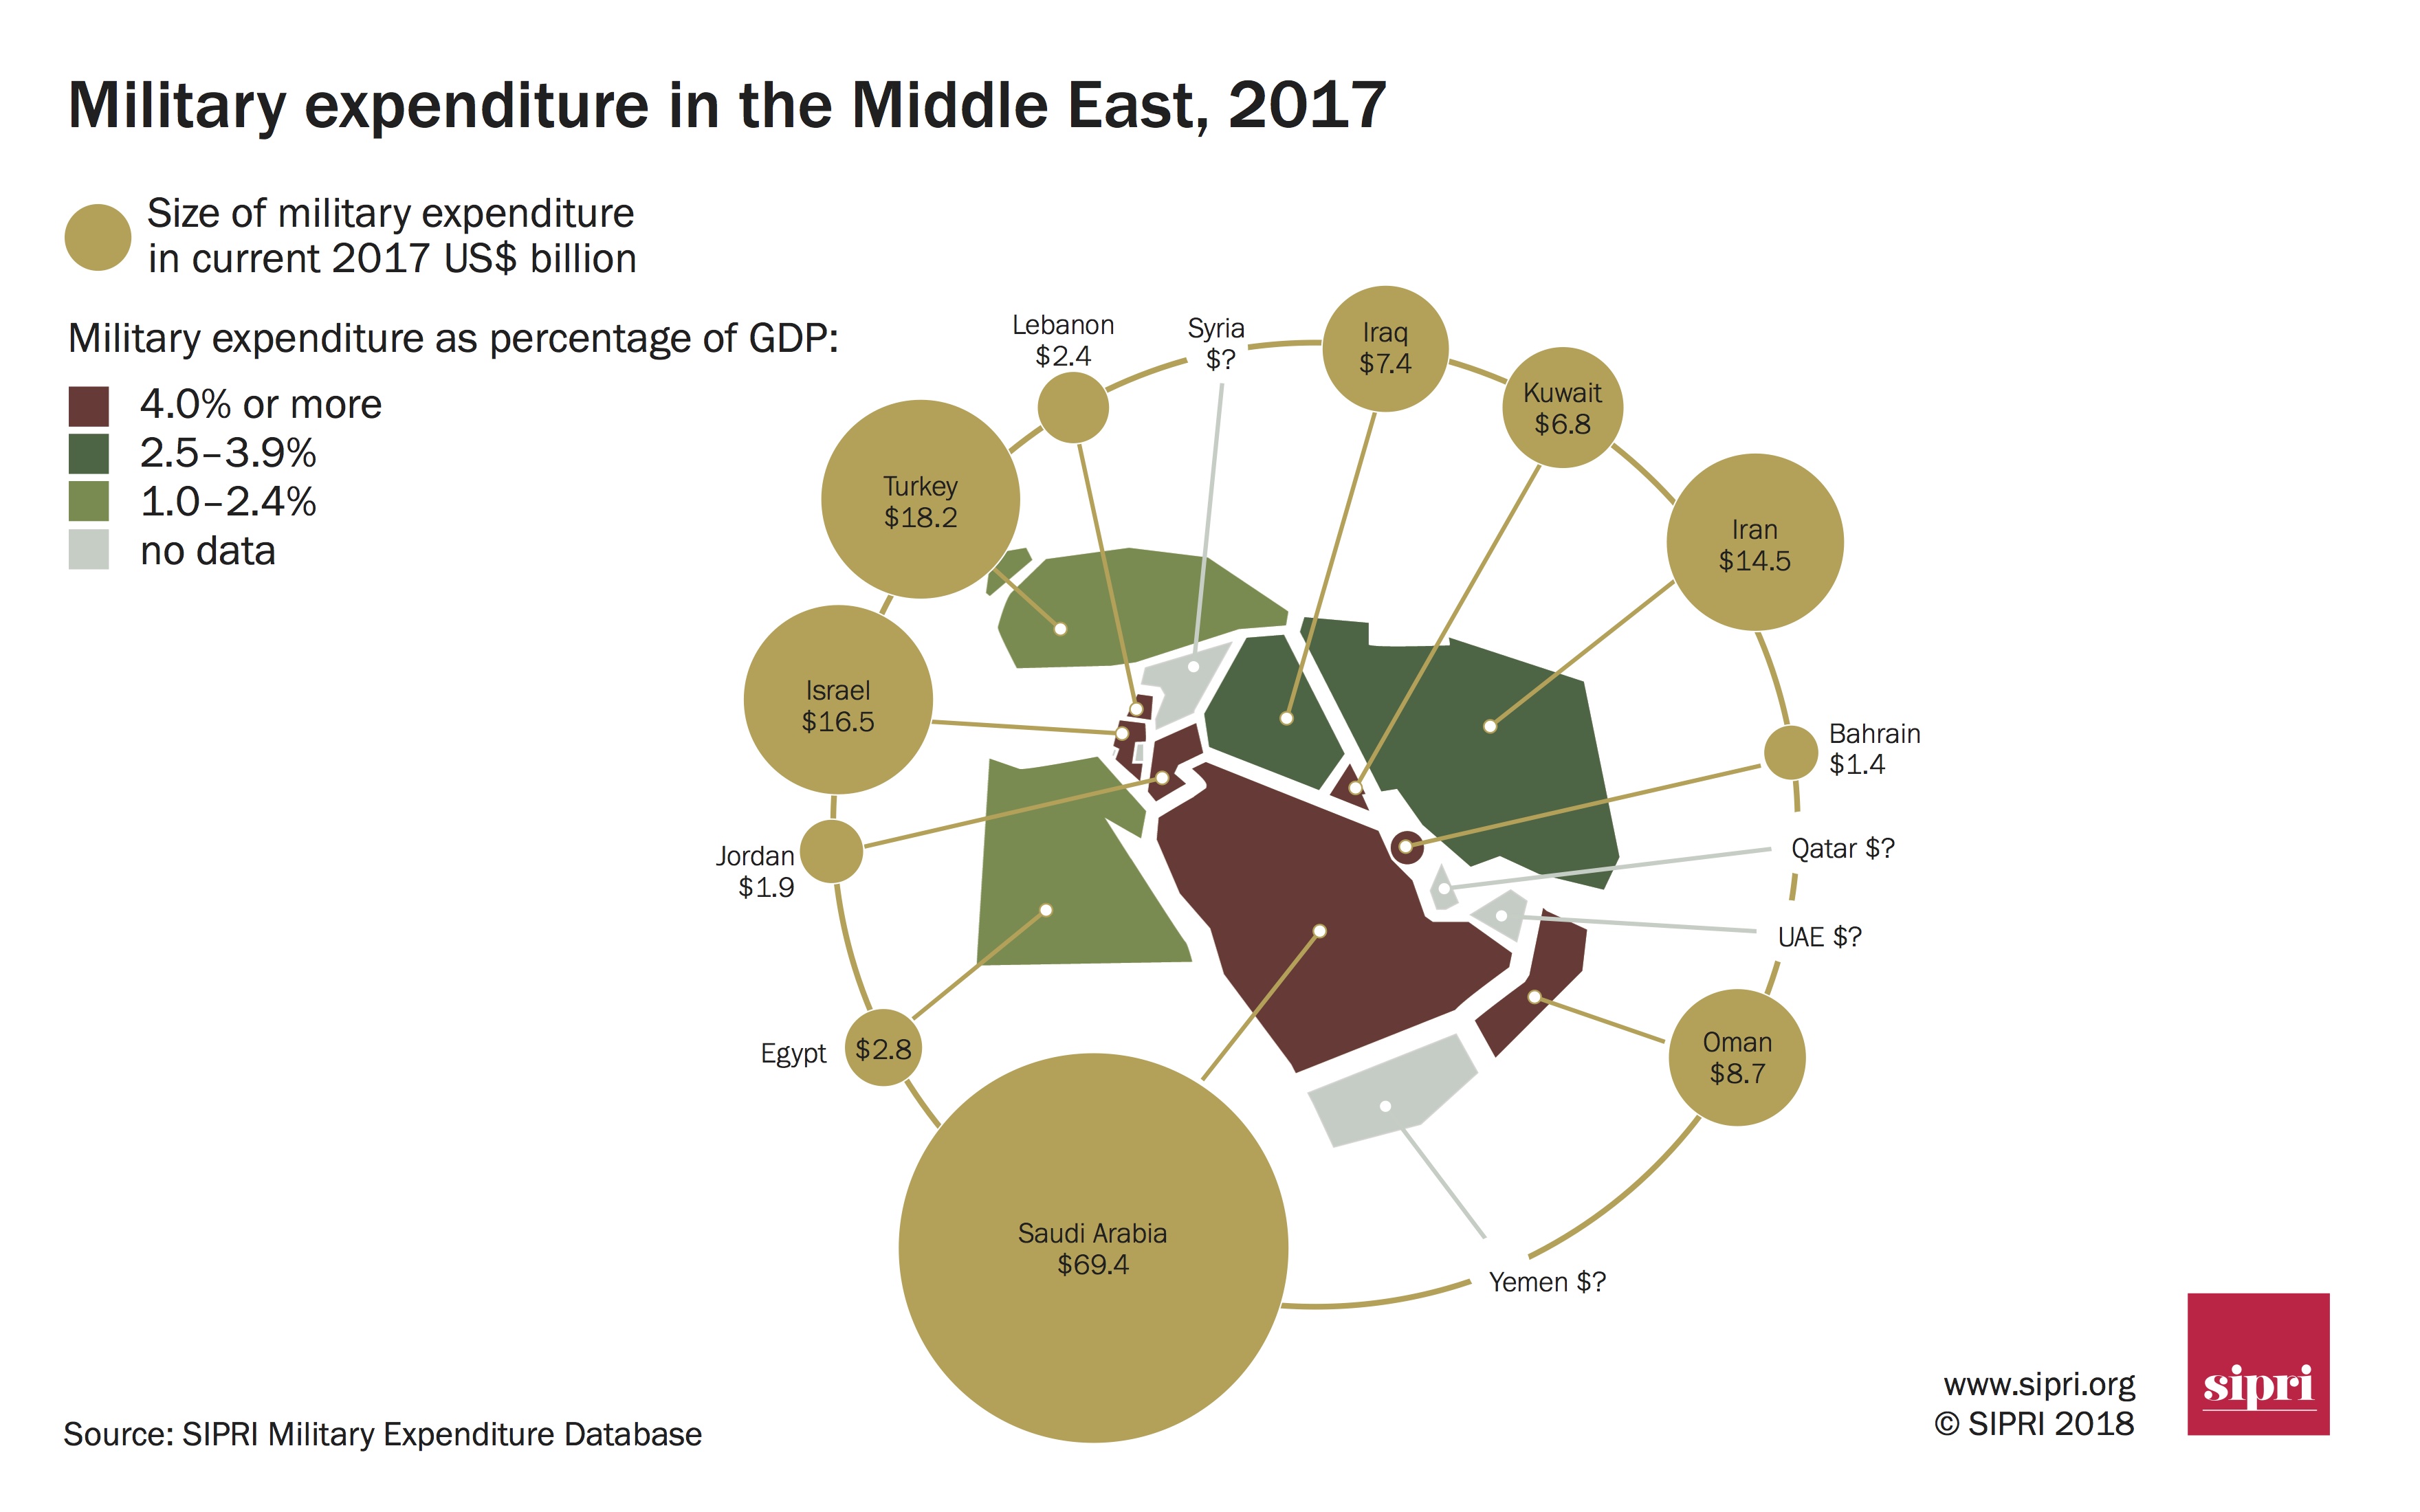 Fig 1. Military expenditure and military expenditure as a percentage of gross domestic product (GDP) in the Middle East